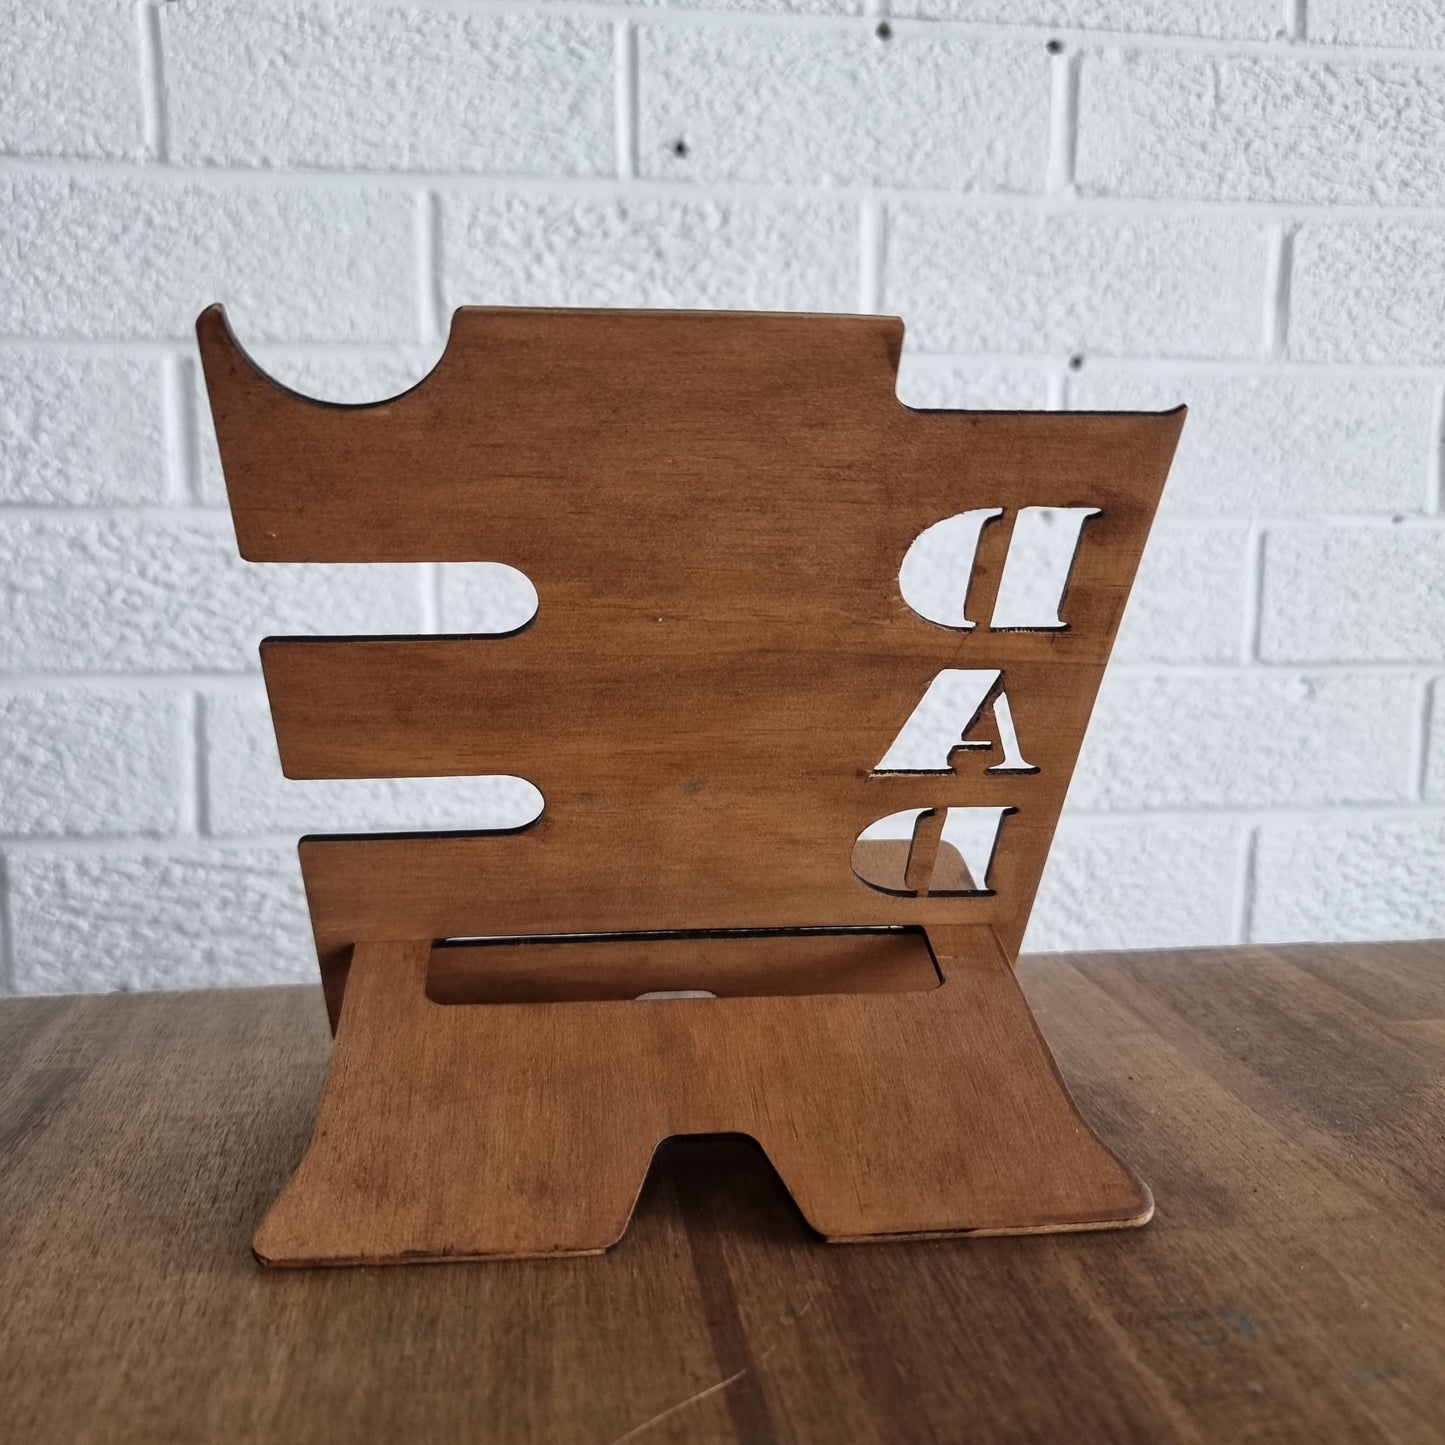 Father's Day Wooden Docking Station back view